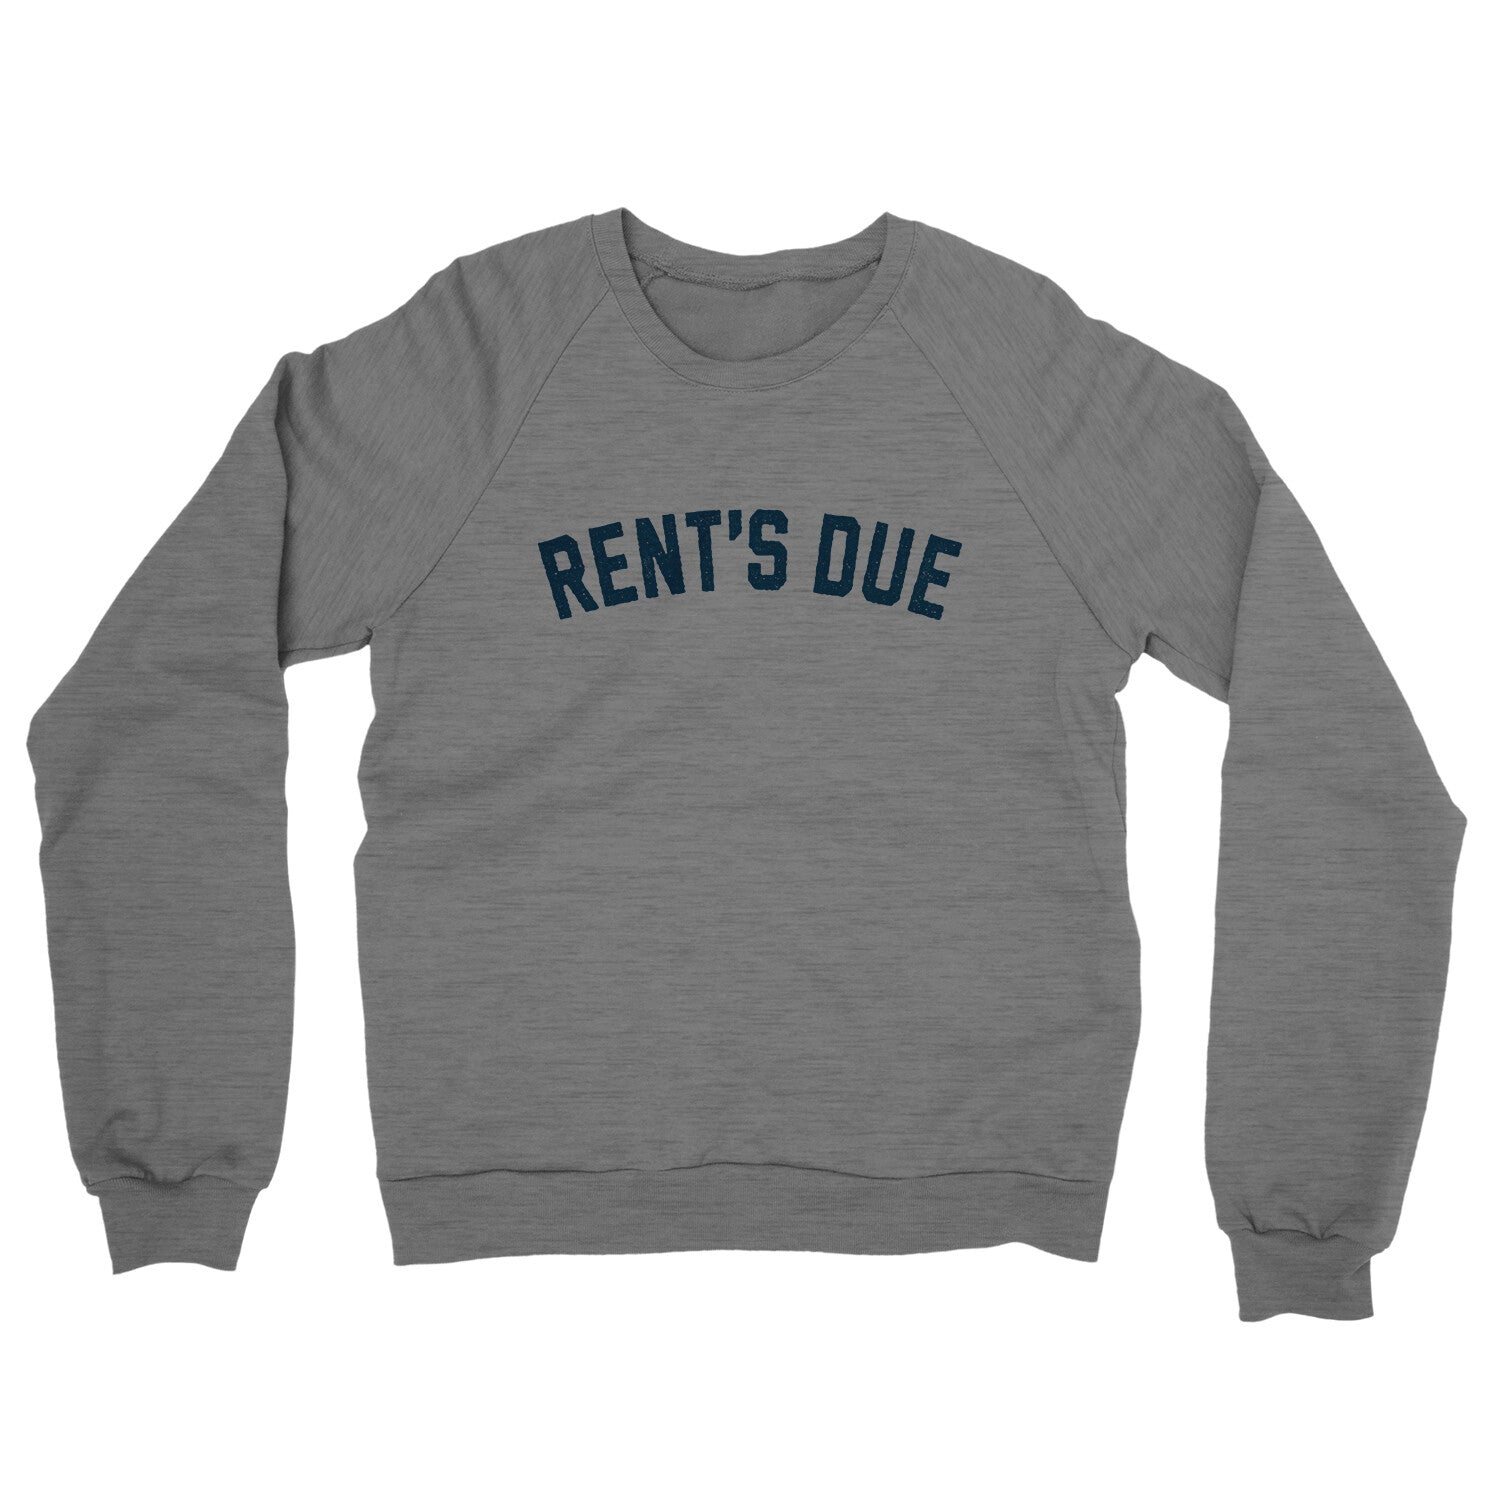 Rent's Due in Graphite Heather Color